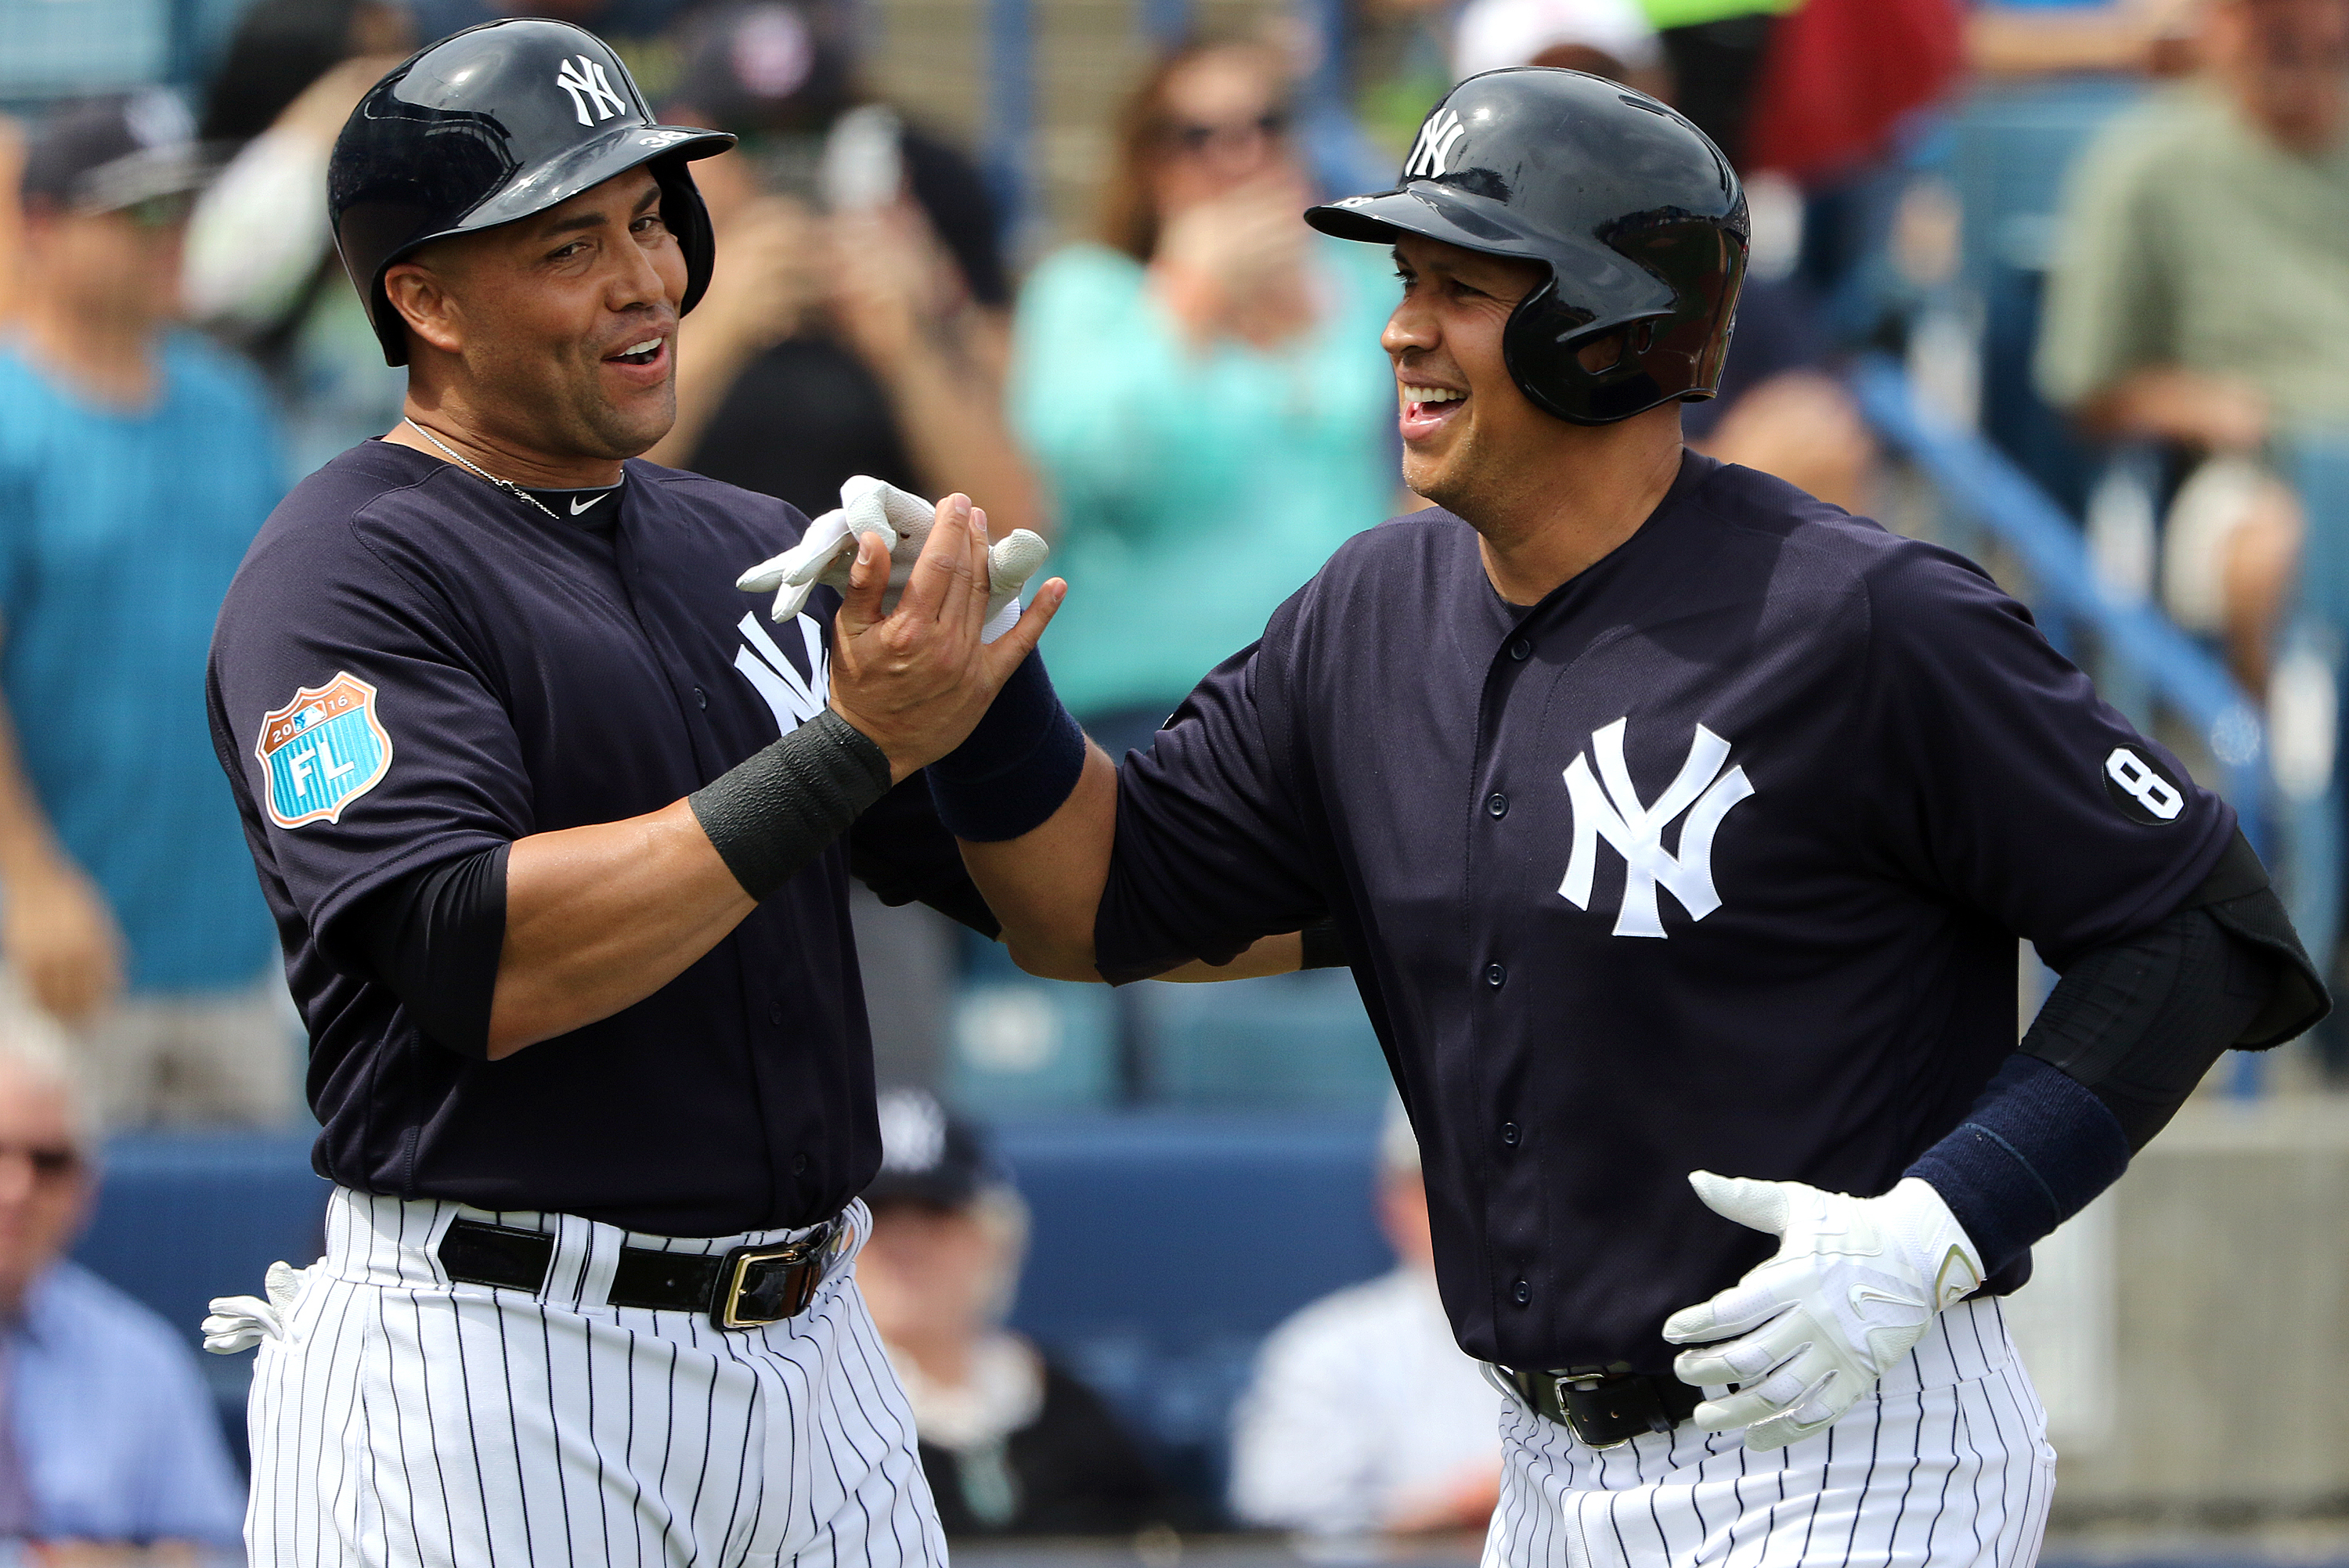 What Yankees manager candidate Carlos Beltran revealed about